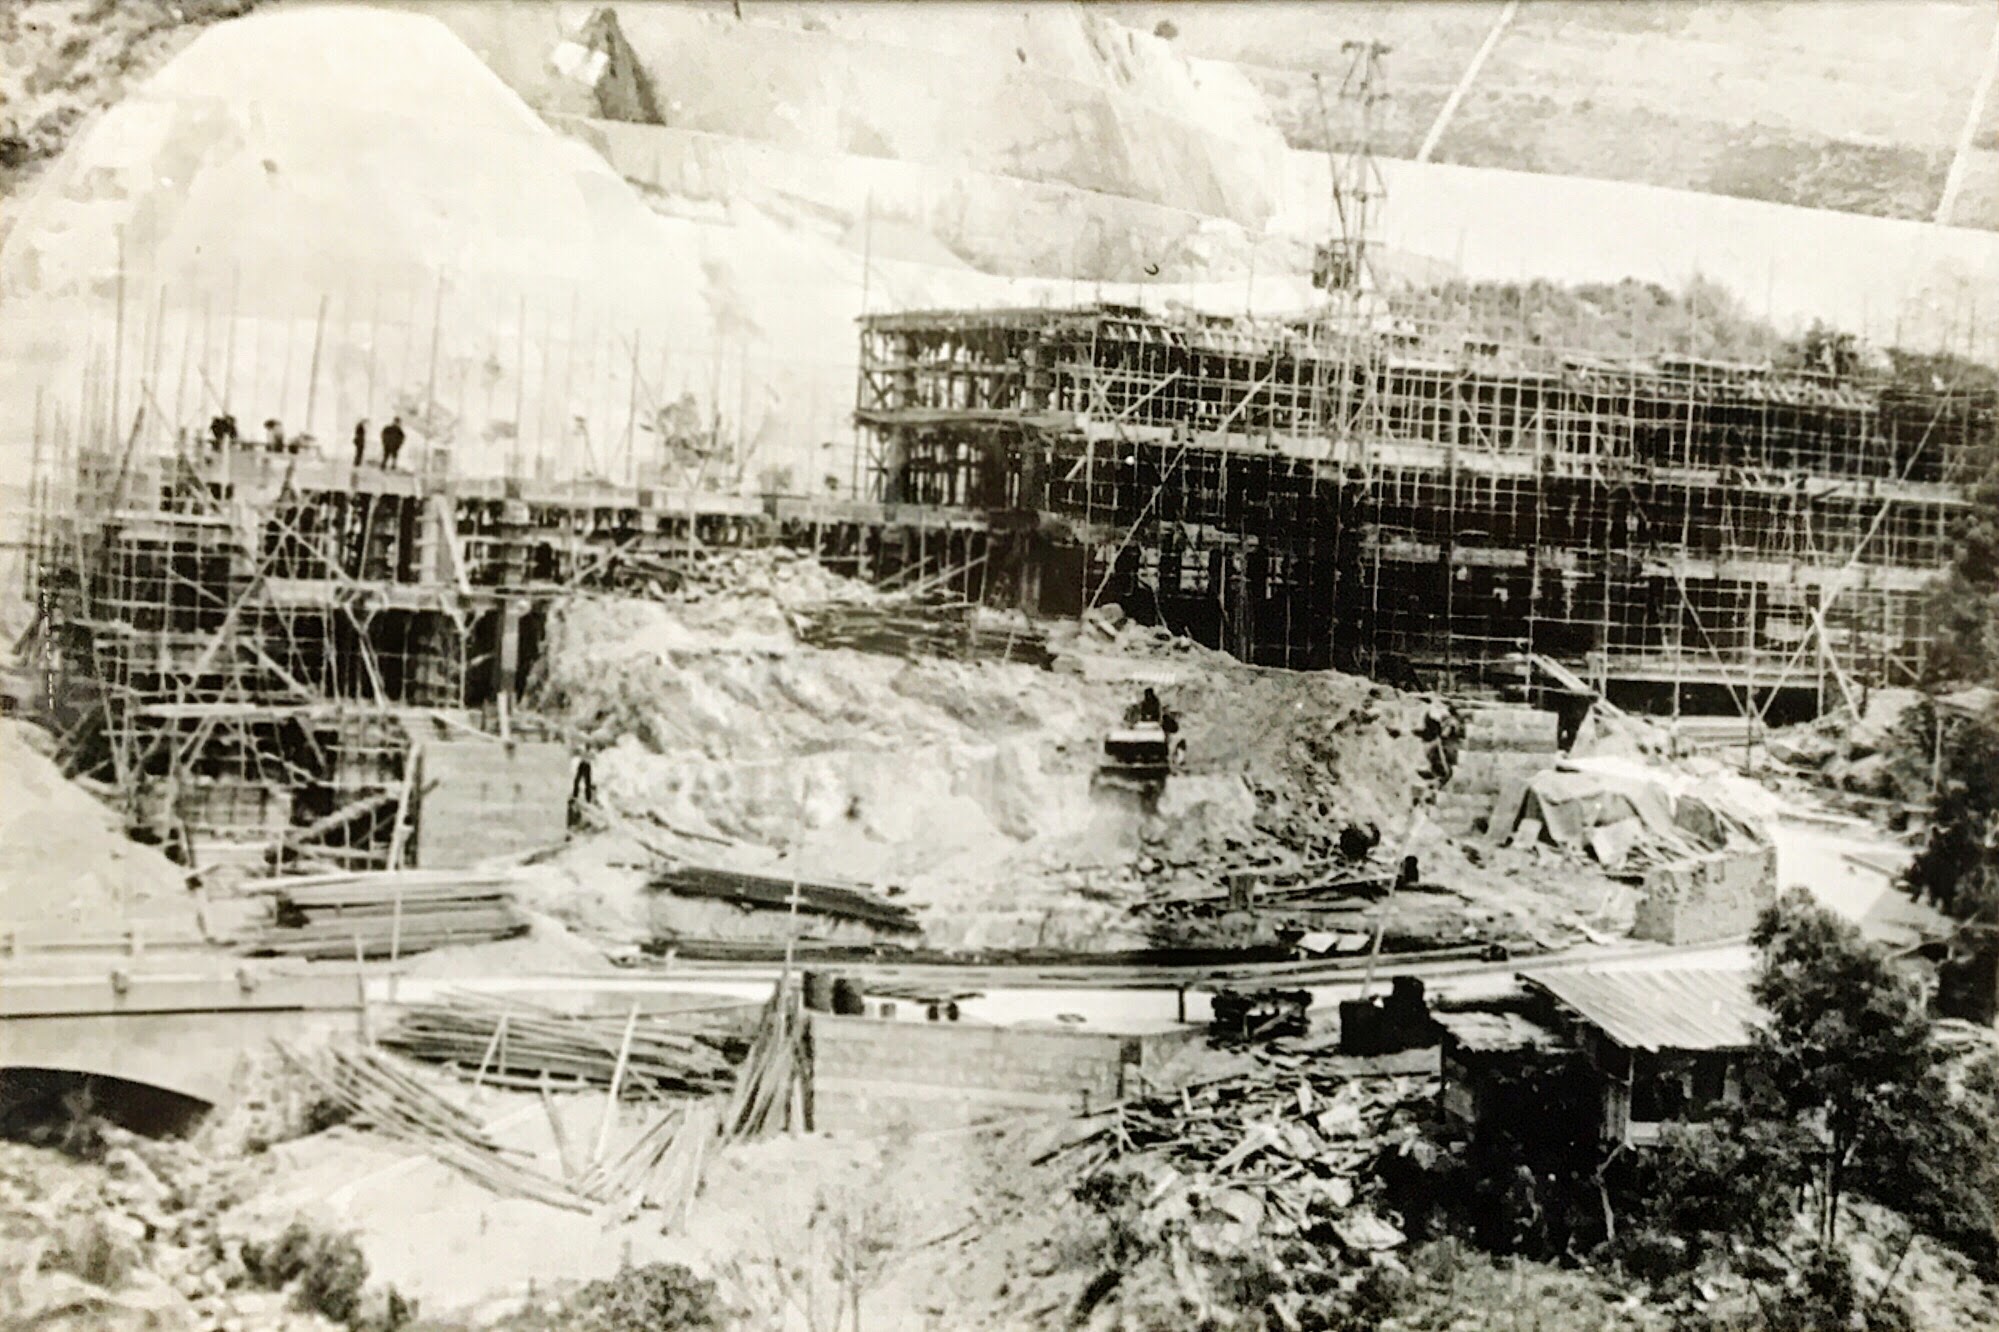 Theology Building under Construction